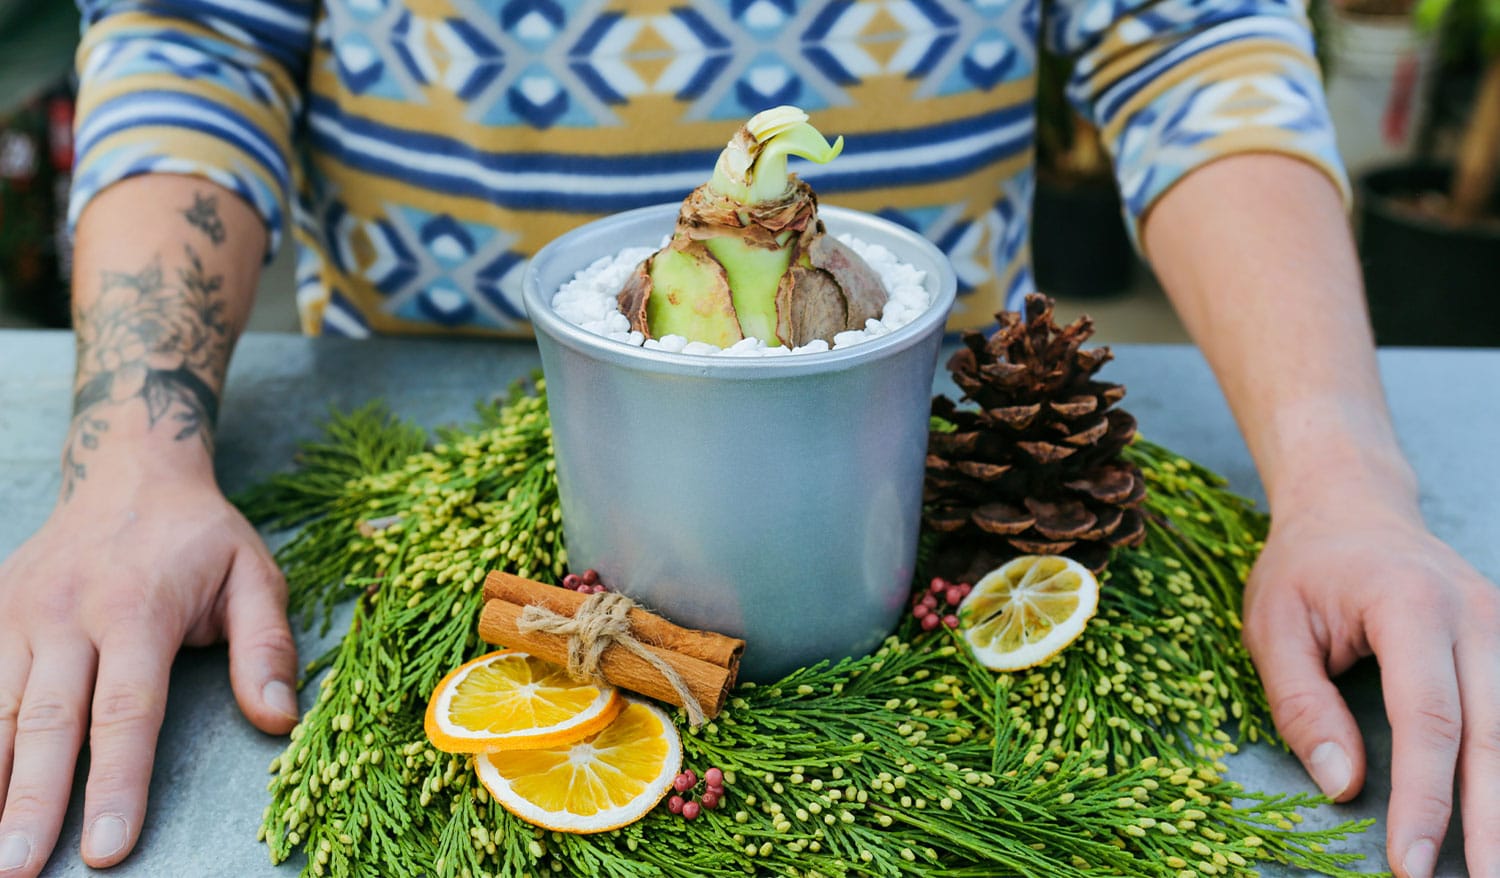 An amaryllis bulb planted in a silver pot and top-dressed with white decorative pebbles and surrounded by an evergreen display with dried orange slices, cinnamon sticks, red berries, and a pinecone